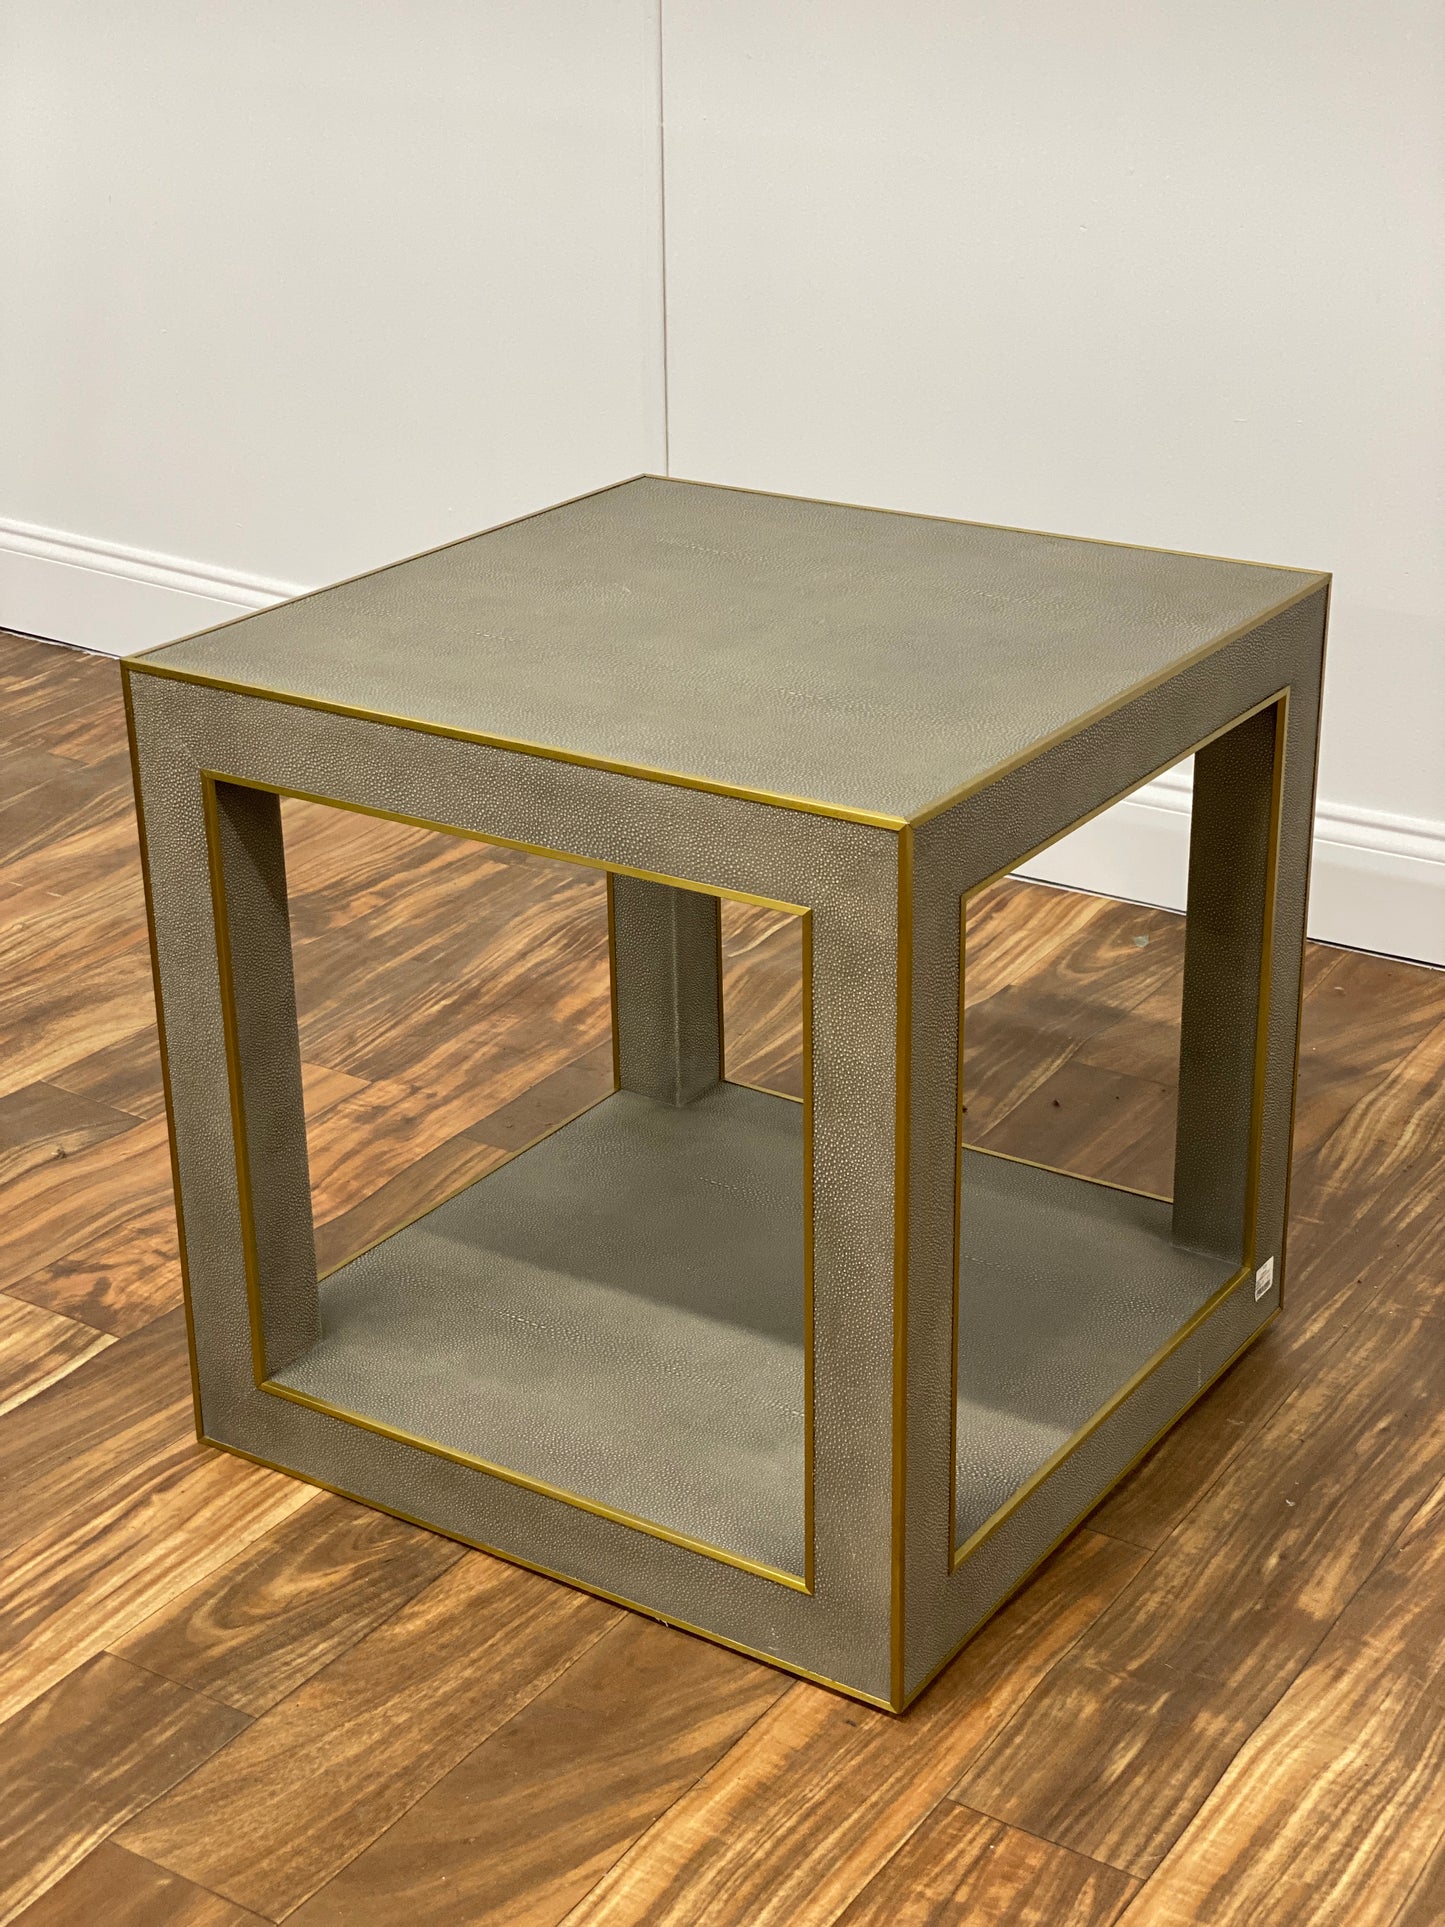 GRAY ALLIGATOR SKIN ACCENT TABLE WITH GOLD TRIM